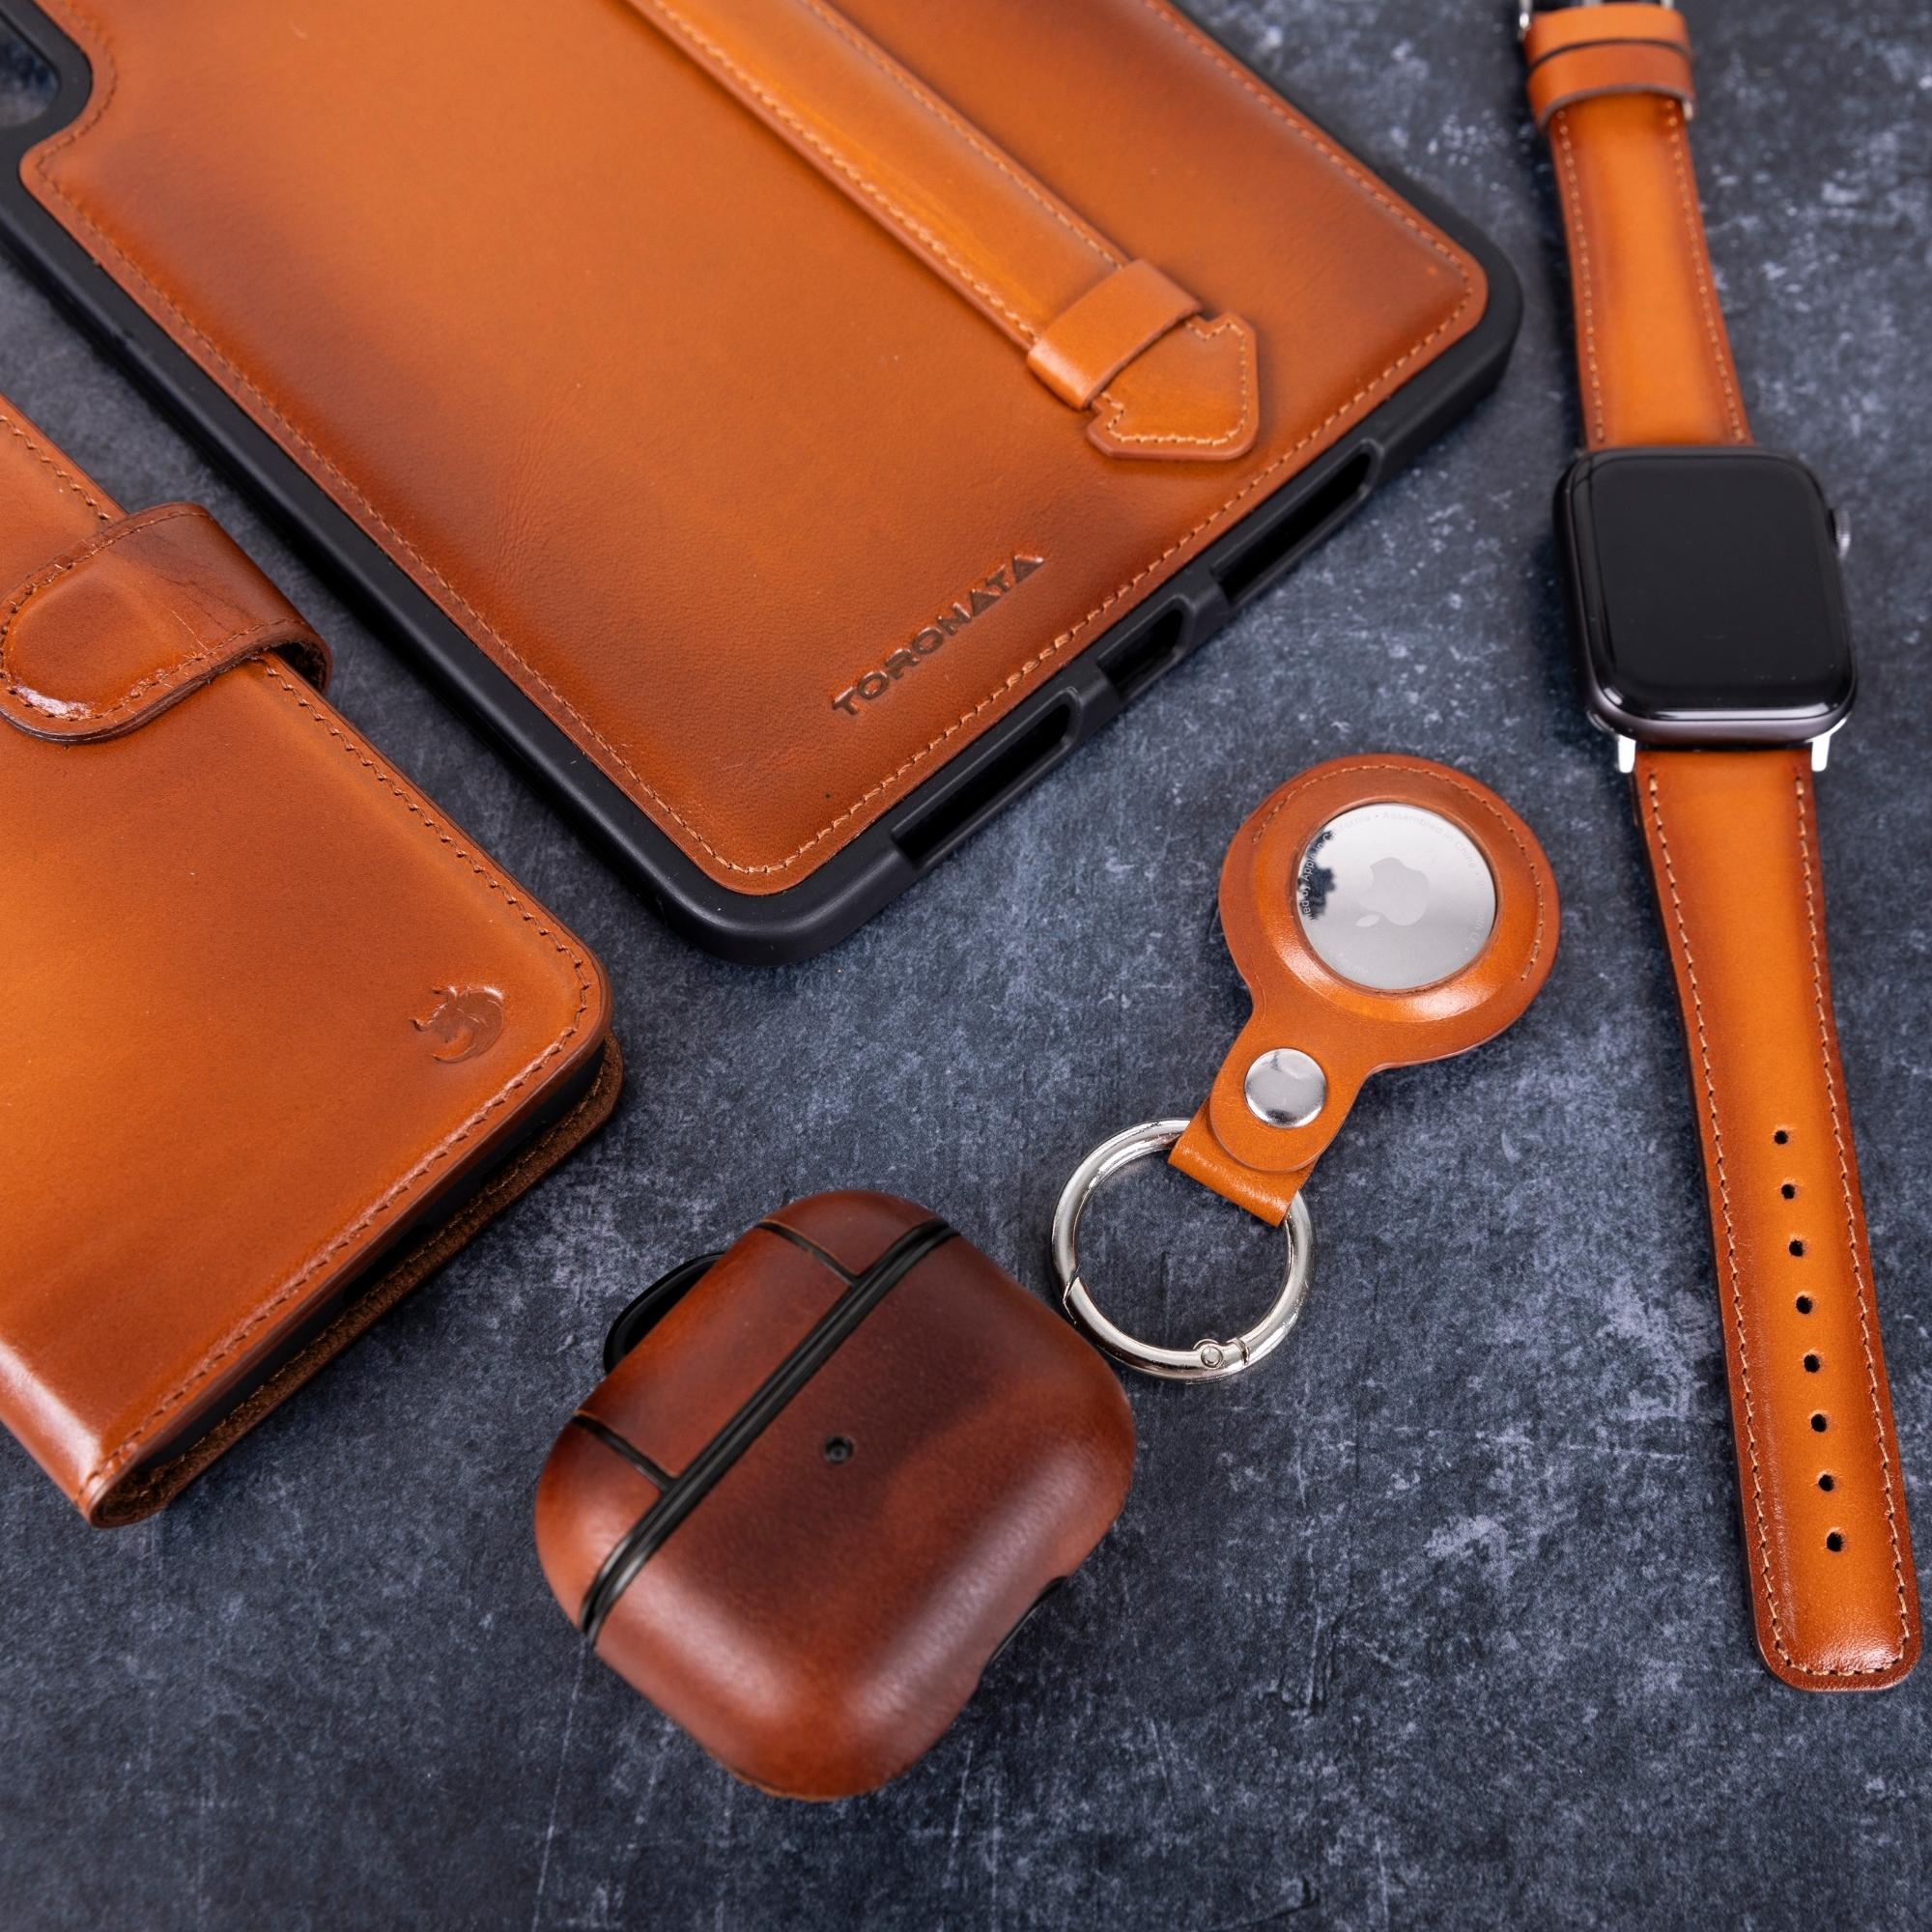 leather cases for apple devices by toronata